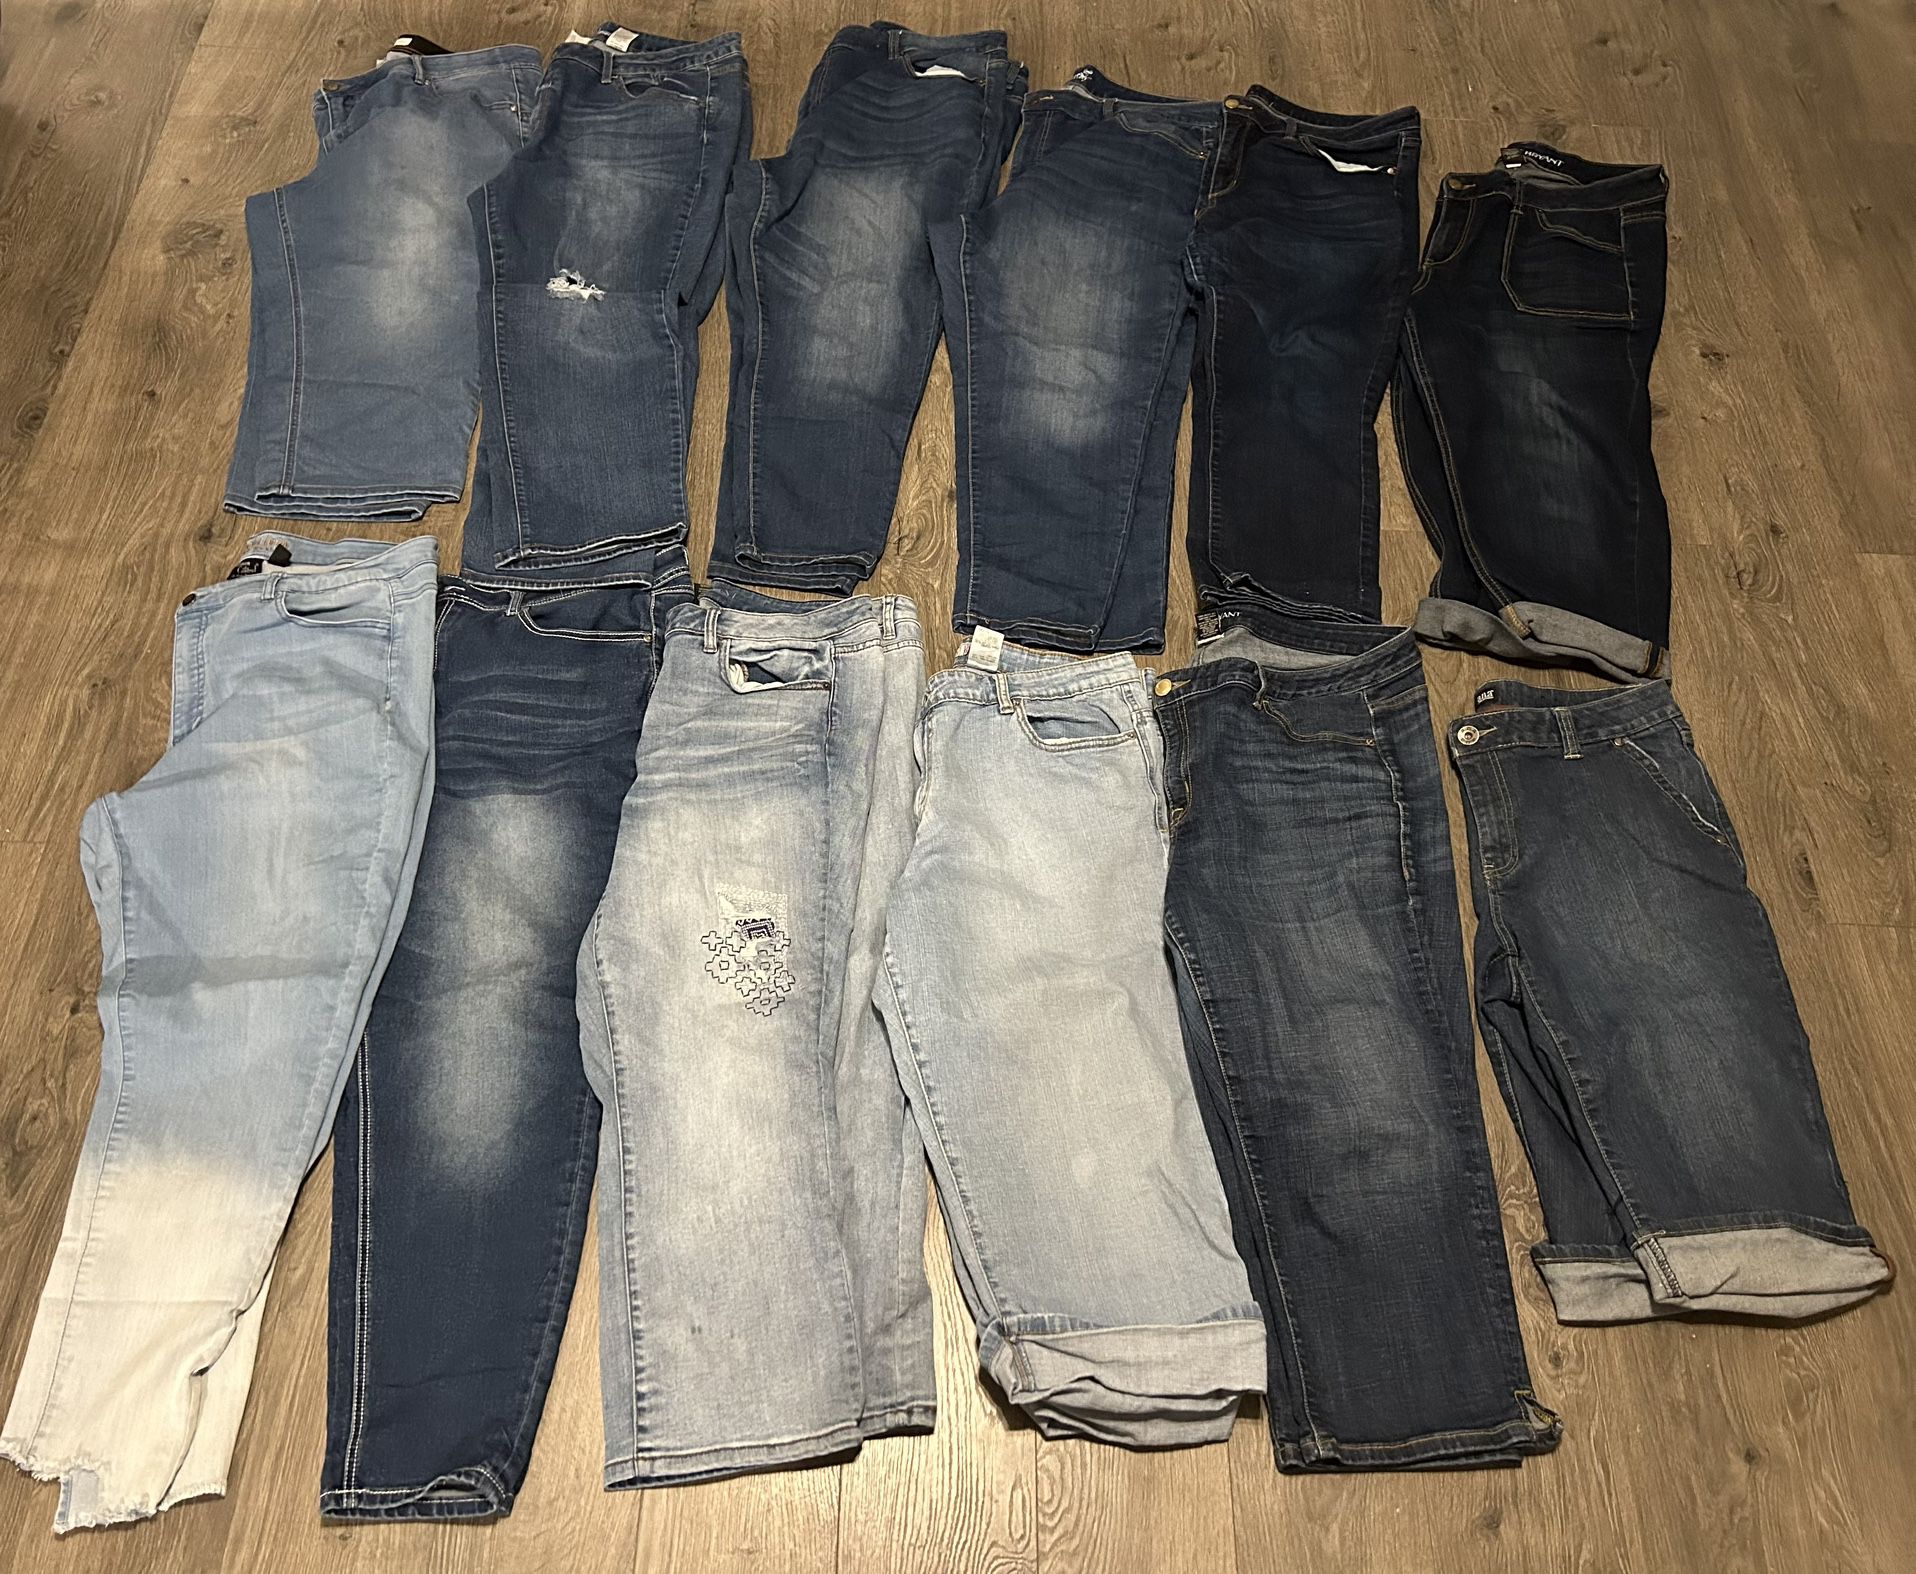 Bundle Of 12 pairs of jeans/capris Size 14w-20w Obo 